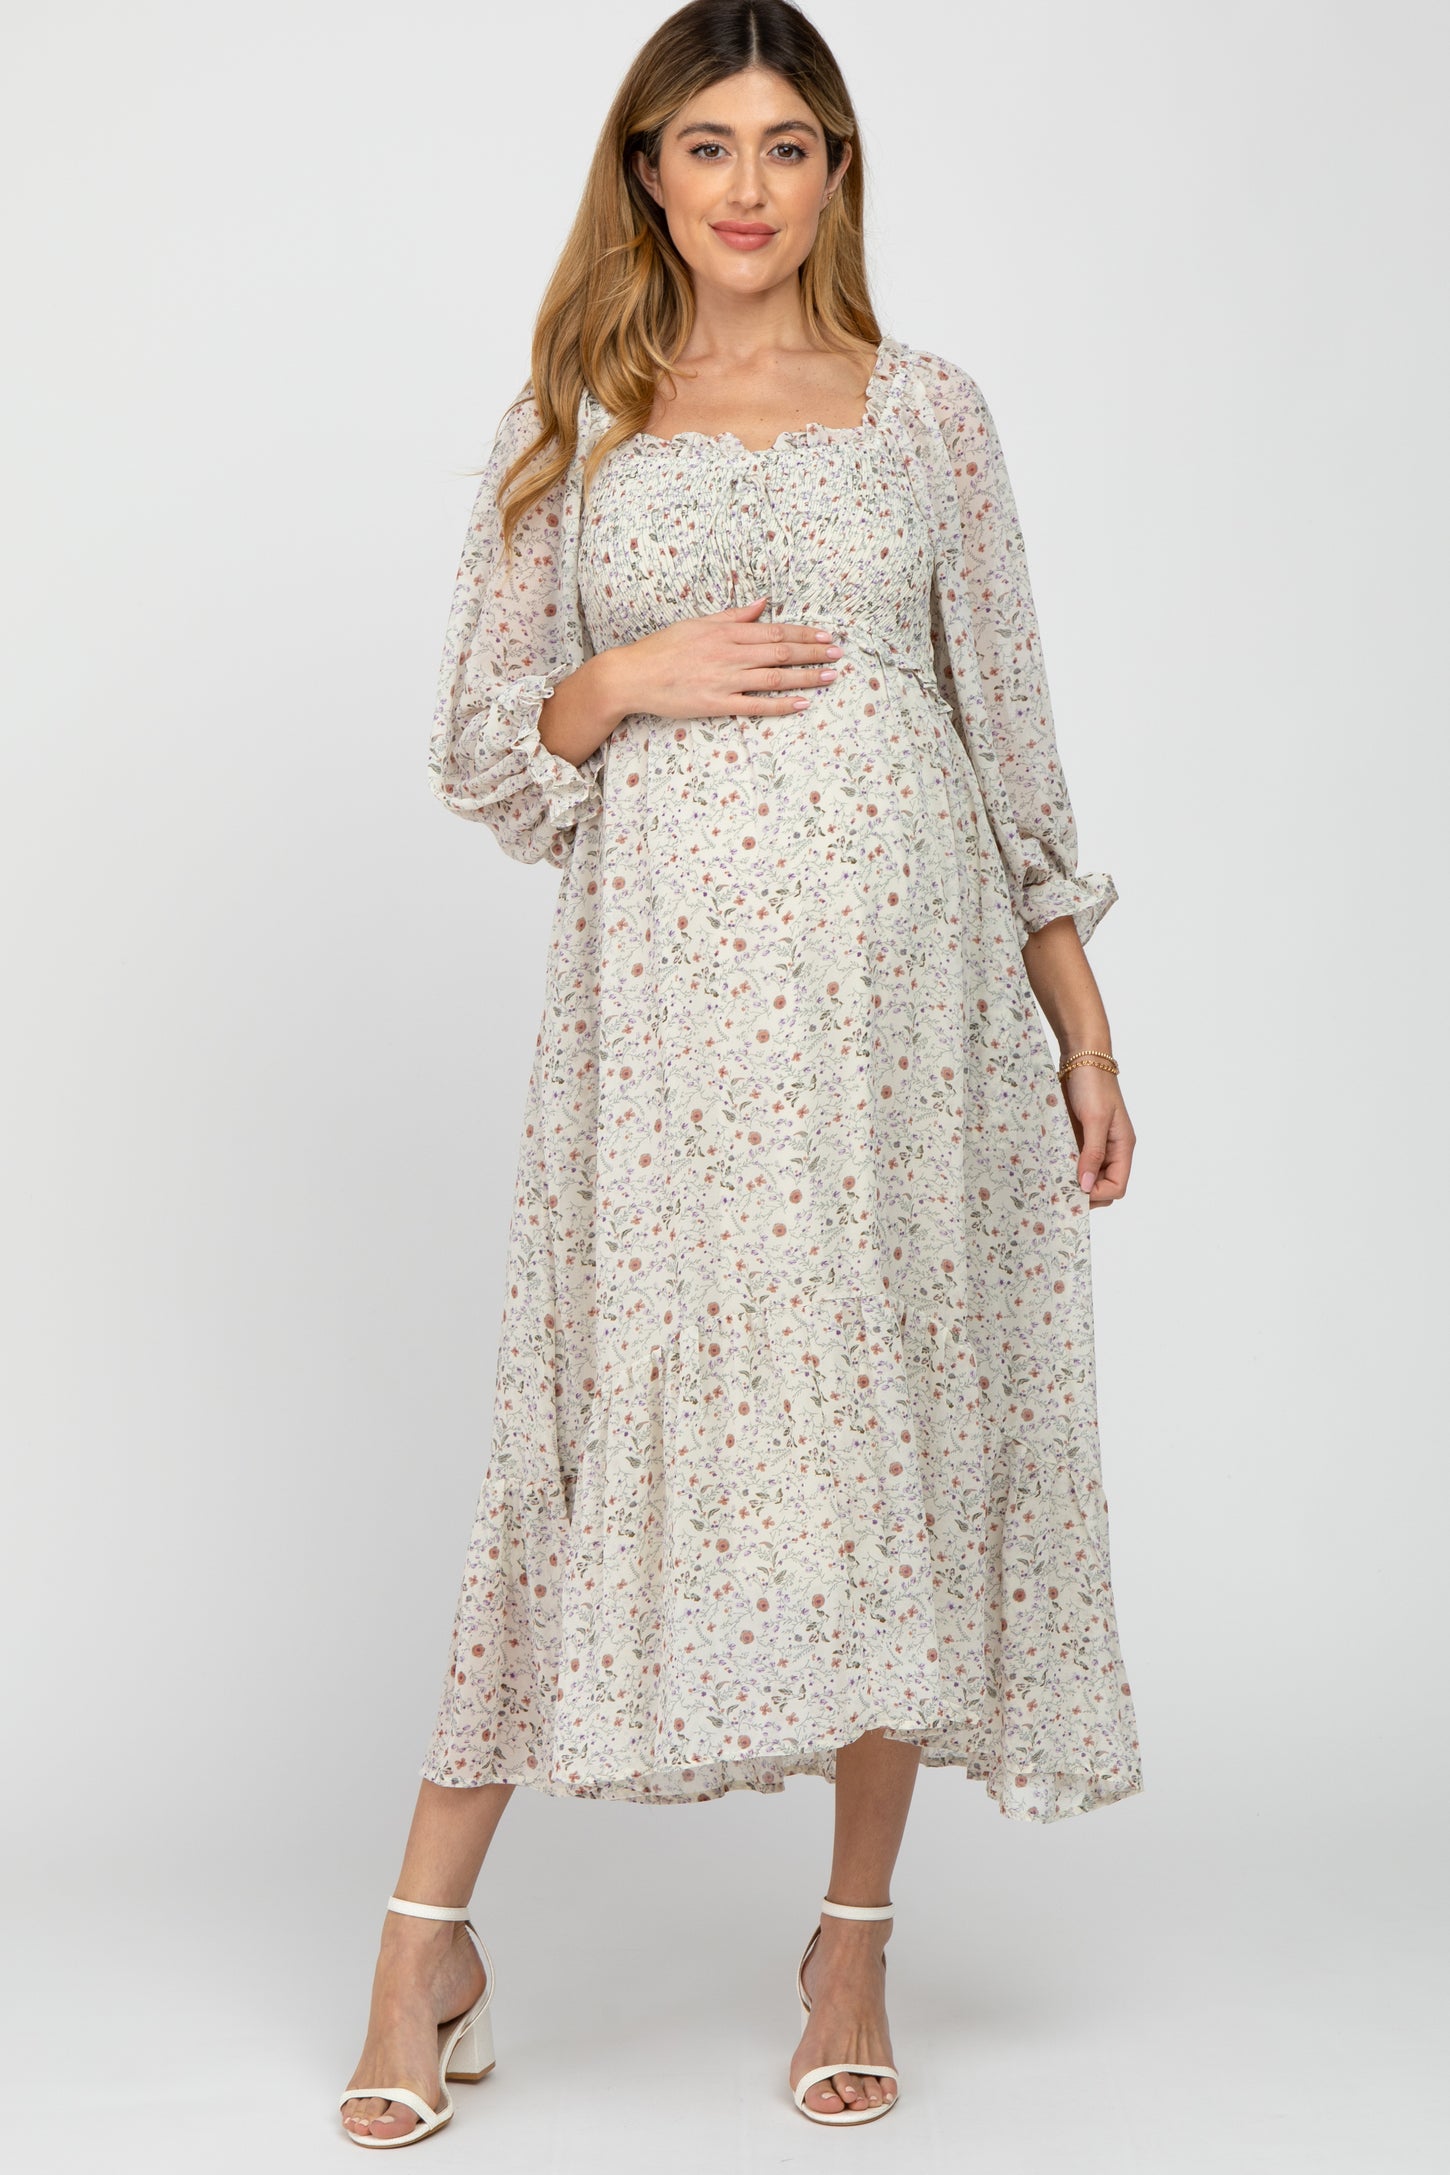 Floral Maternity Dress for Photoshoot Baby Shower, Square Neck Puff Sleeve  Maternity Boho Smocked Pregnancy Dresses